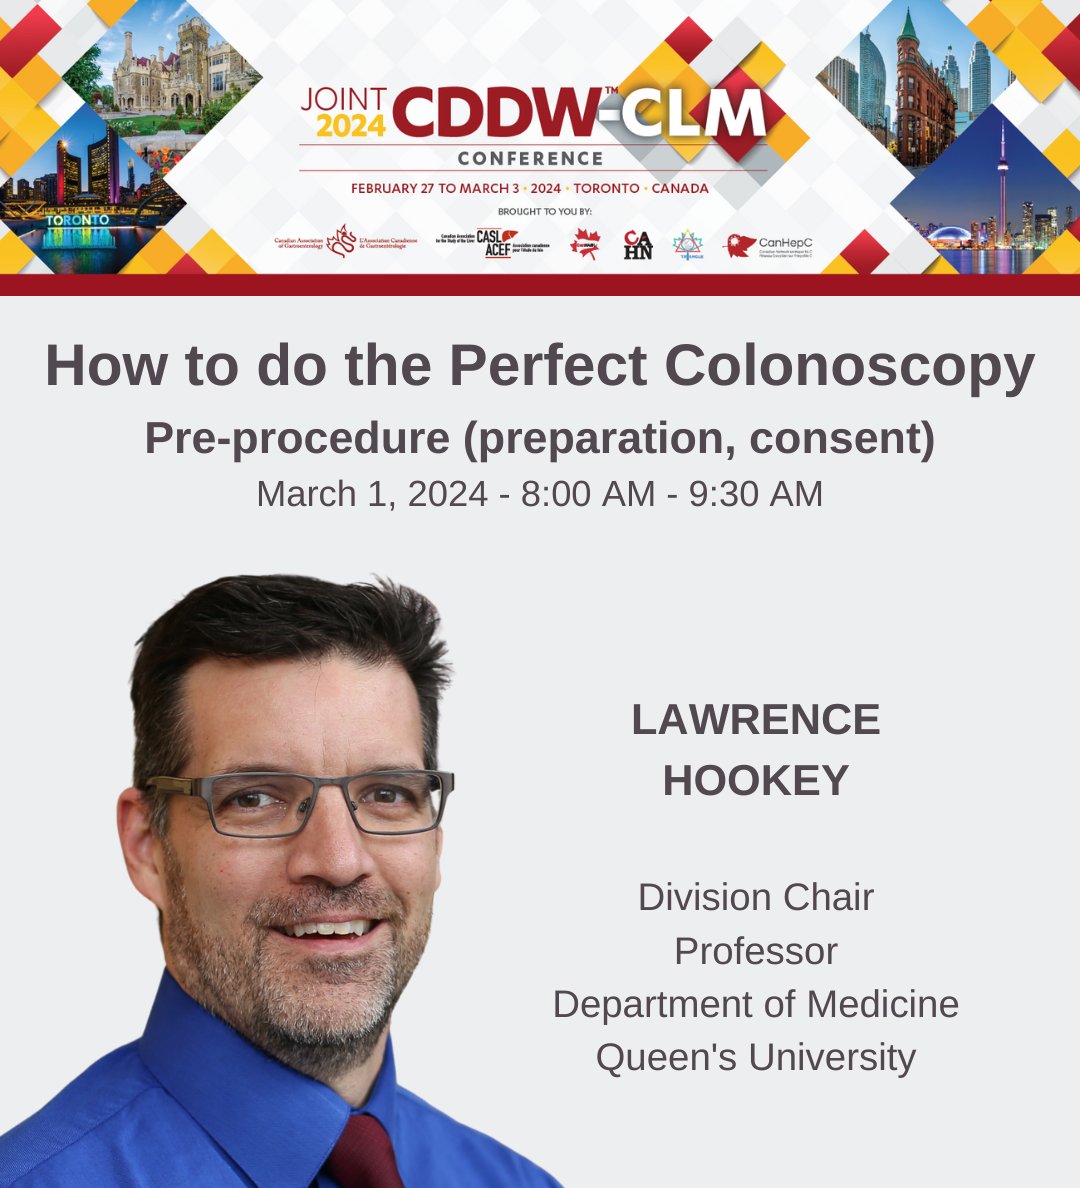 How do you do a perfect colonoscopy? @Hookeyl from @queensu will guide us on the pre-procedure (preparation, consent) for a successful colonoscopy. Checkout the #CDDWCLM2024 online program: 🔗bit.ly/3GiqXJV We hope to see you there!